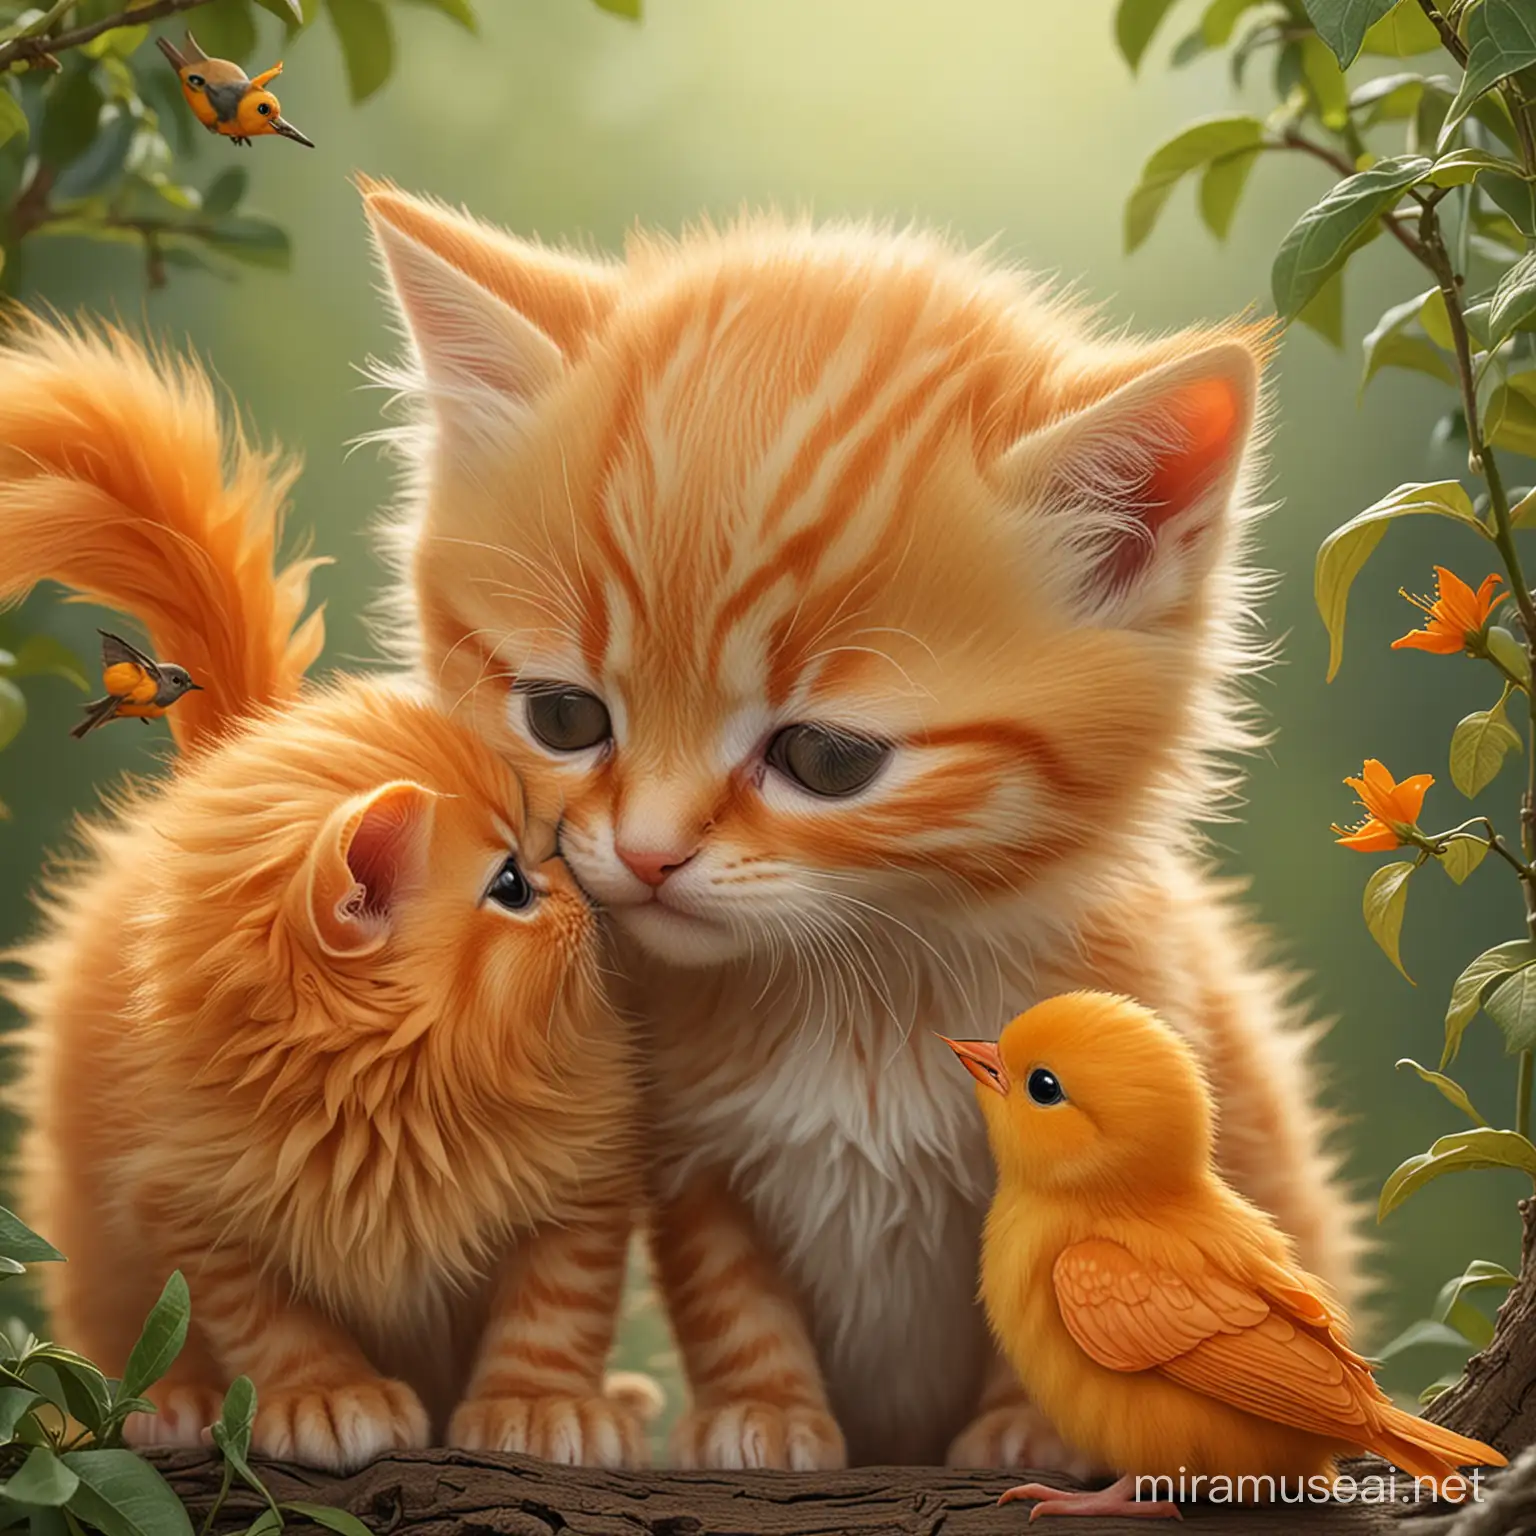 Adorable Orange Kitten Whispering Secrets to a Feathered Friend